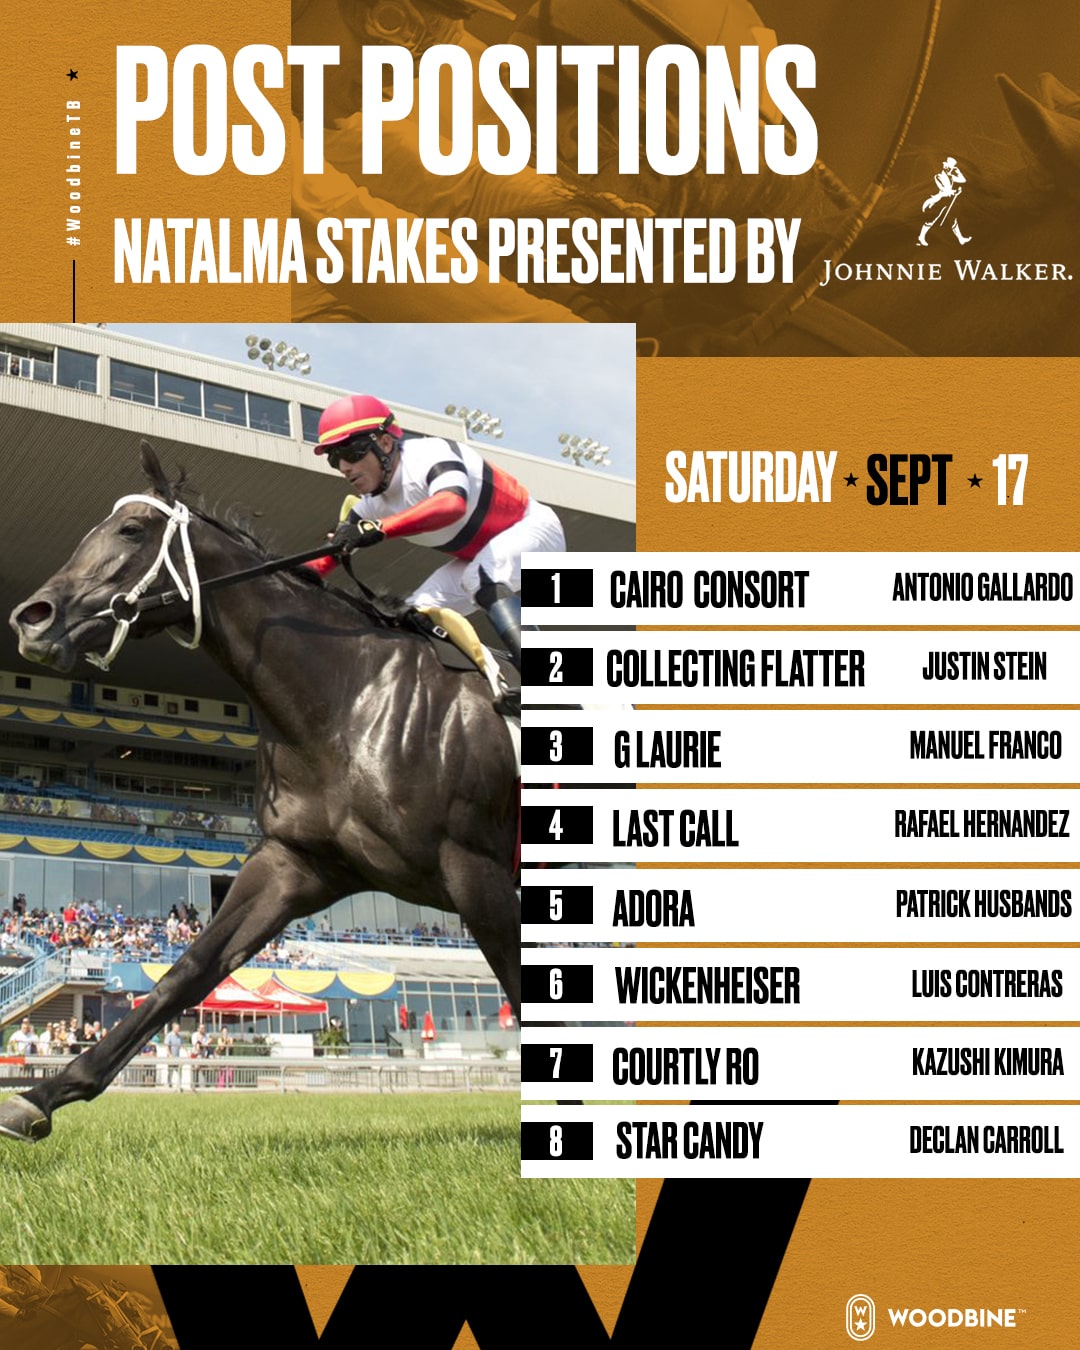 Johnnie Walker Natalma Stakes Post Positions